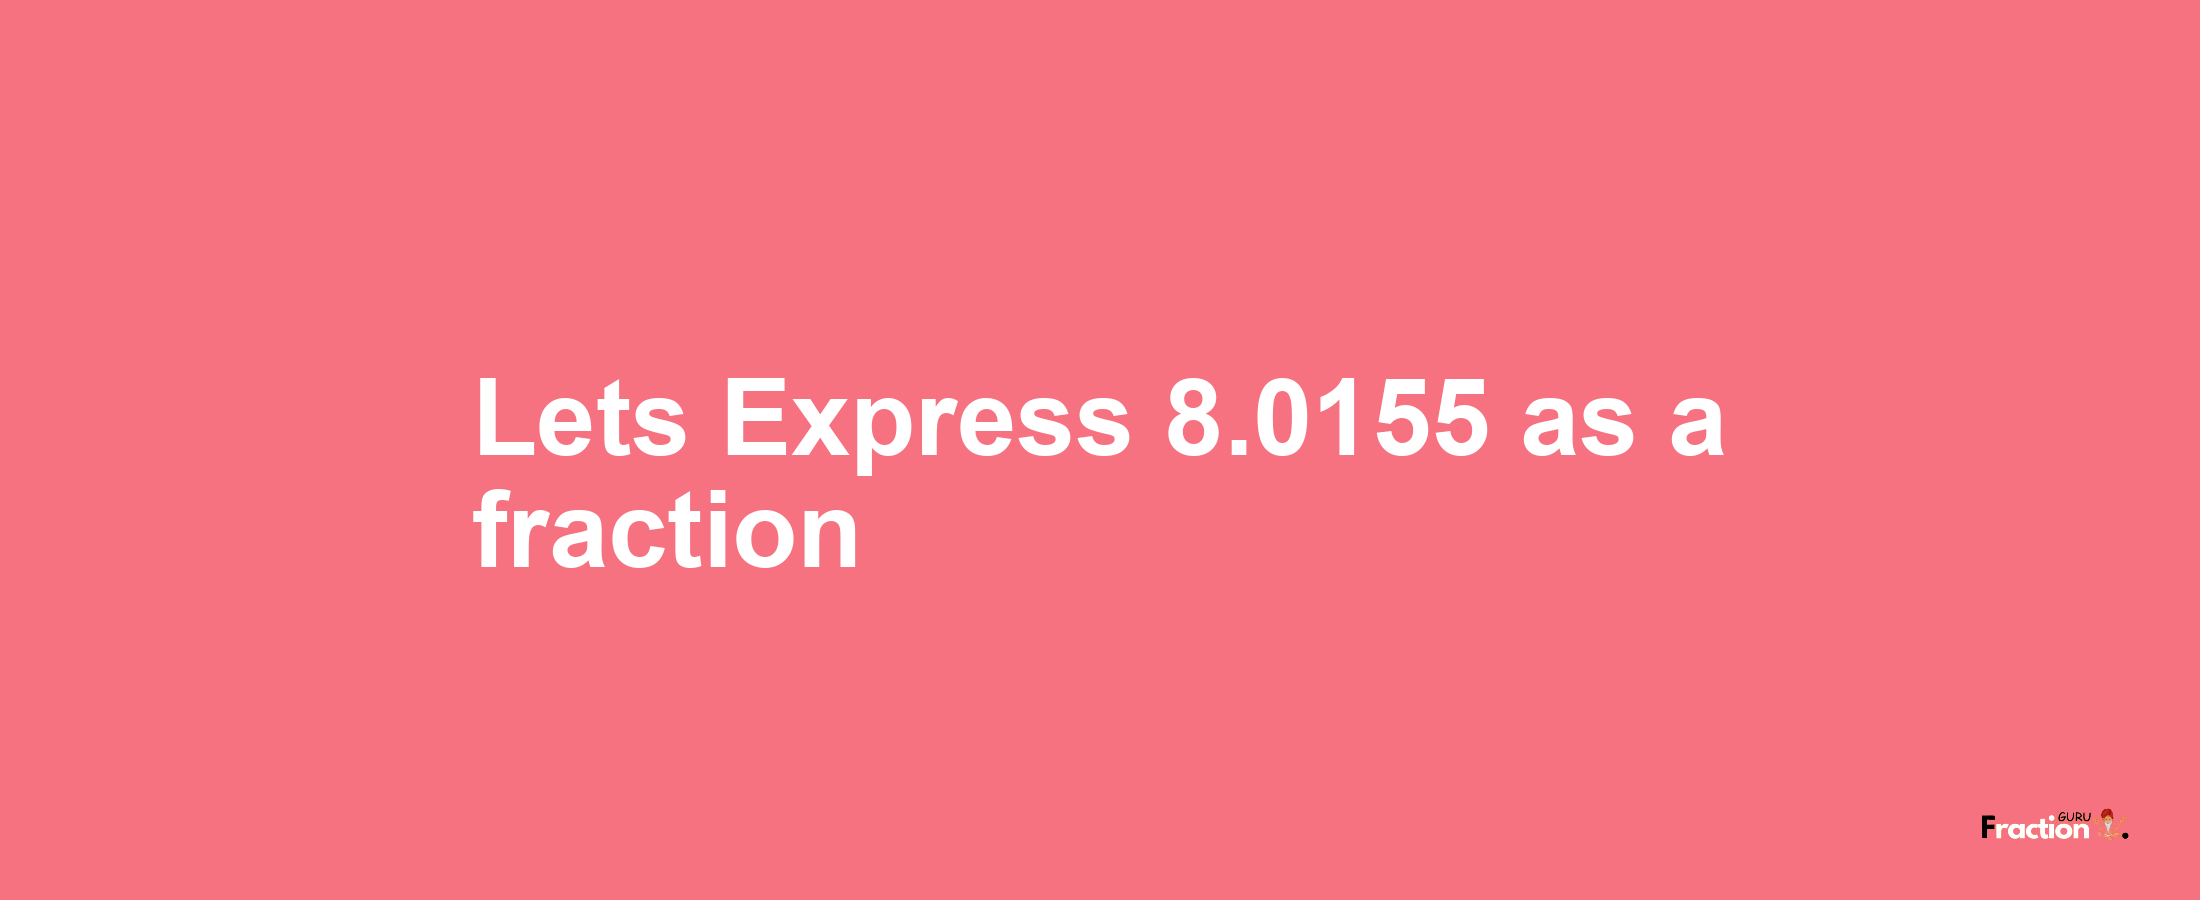 Lets Express 8.0155 as afraction